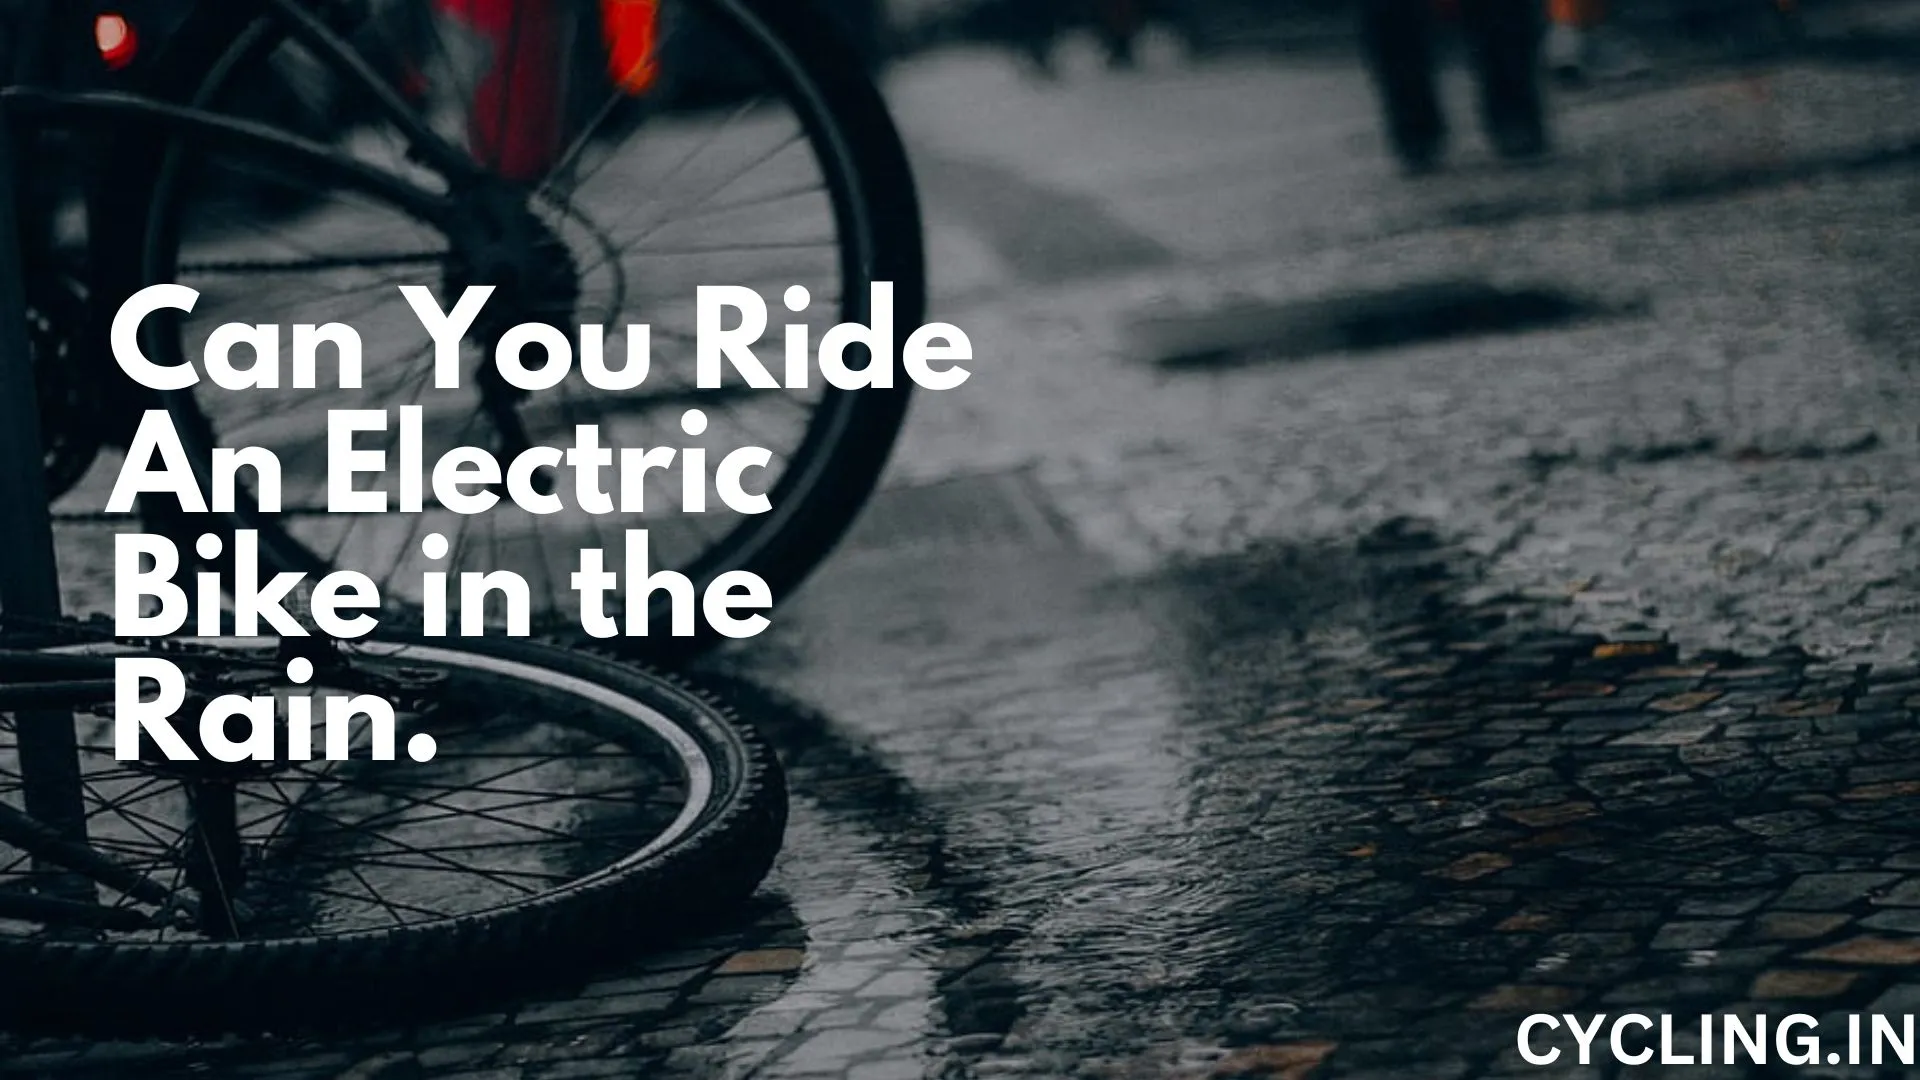 Can You Ride an Electric Bike in the Rain - A bike lying on the wet road.